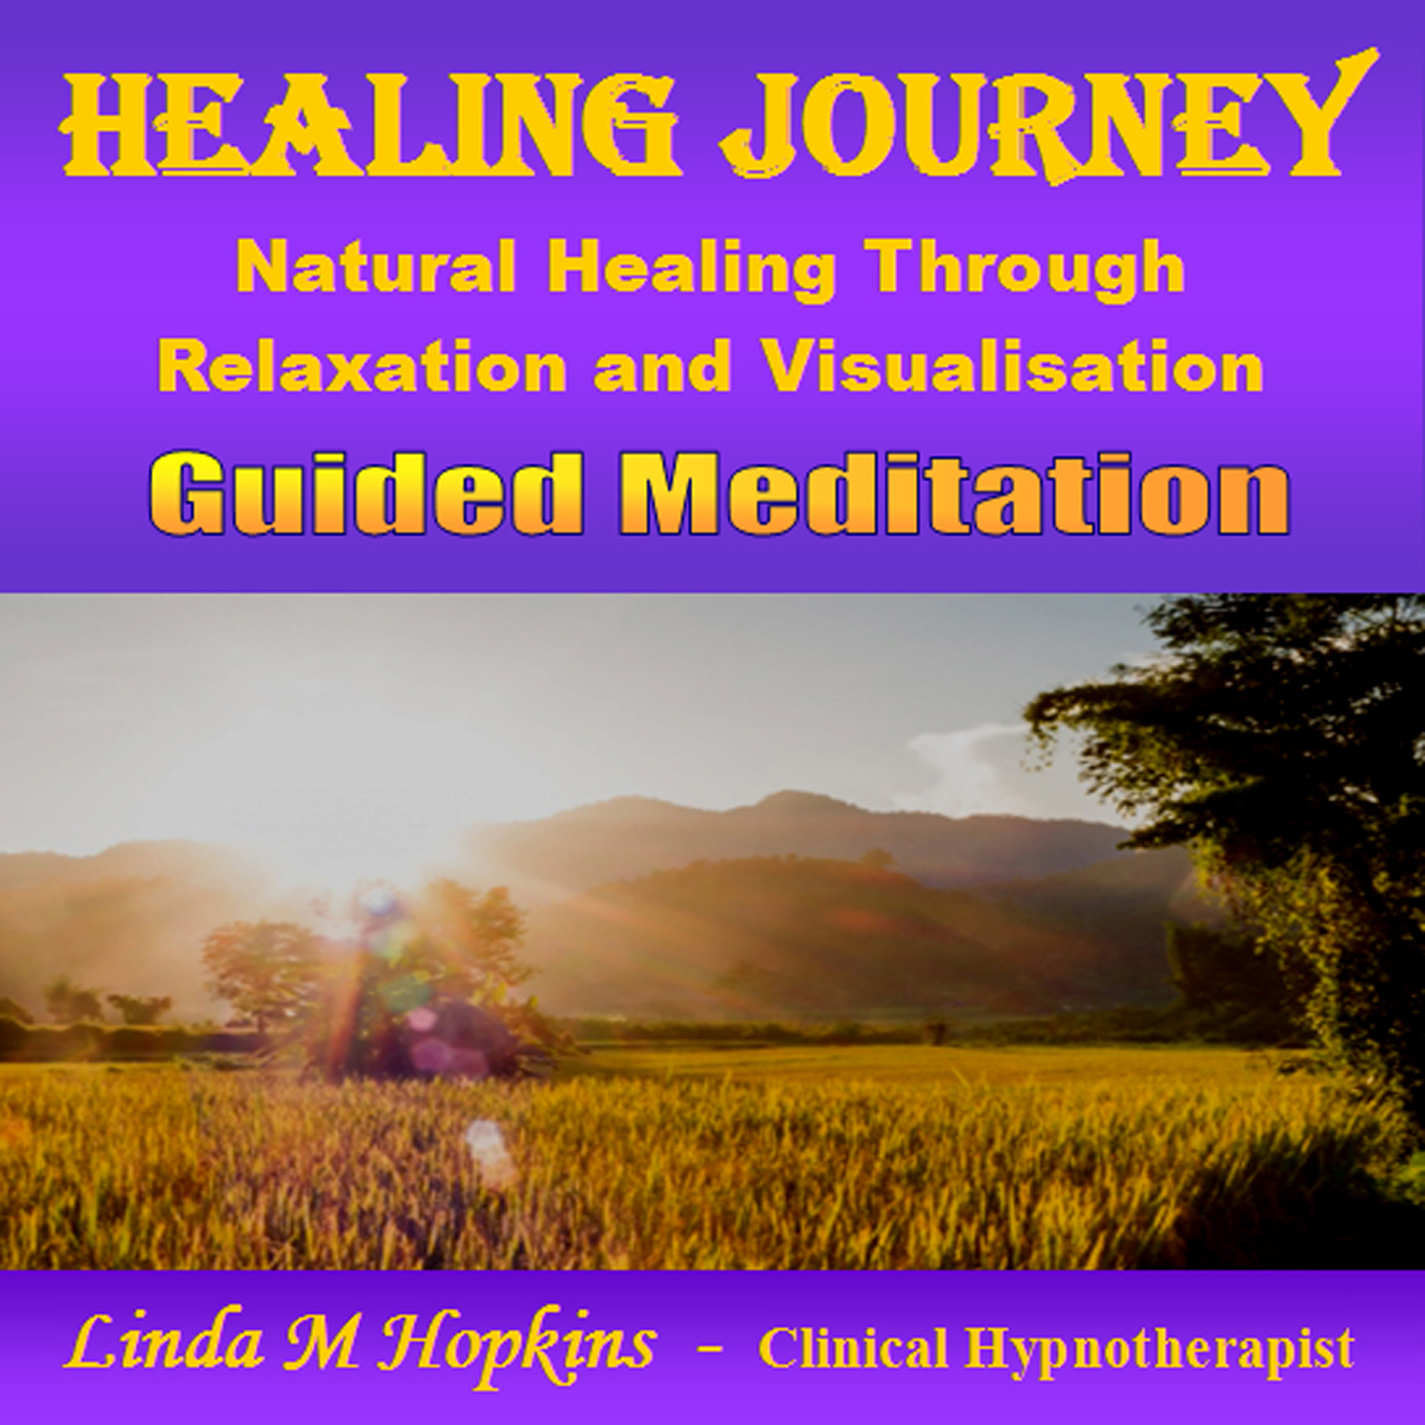 the journey emotional healing